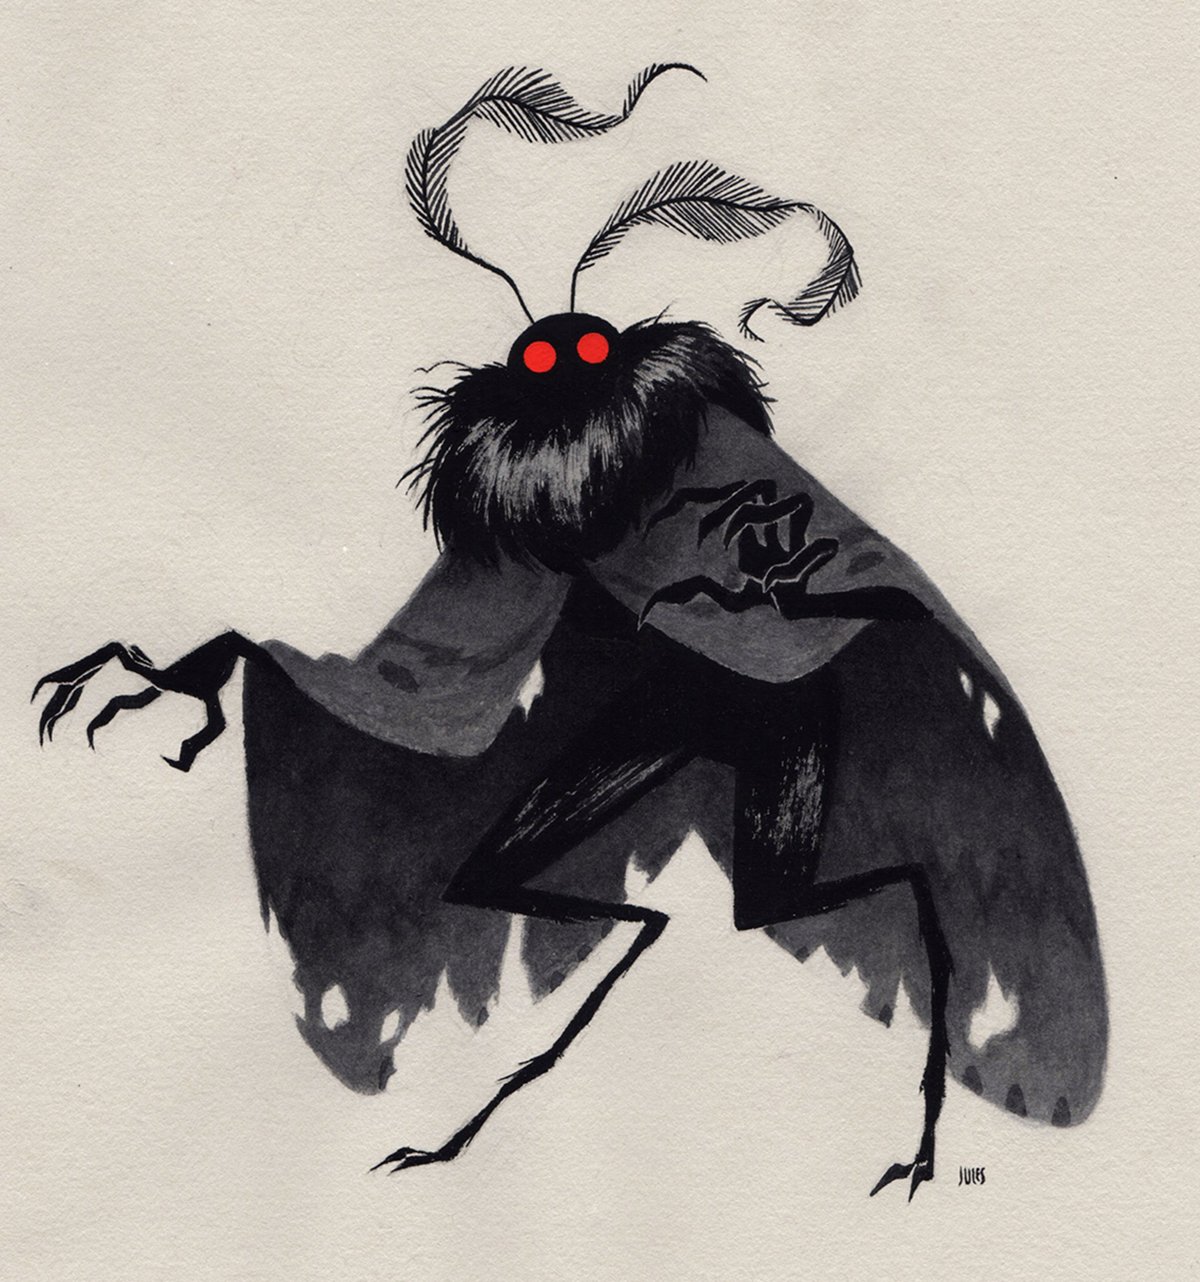 An illustration of a furry humanoid black moth with red eyes and grayish wings standing upright on a beige background. Signed by JWS.